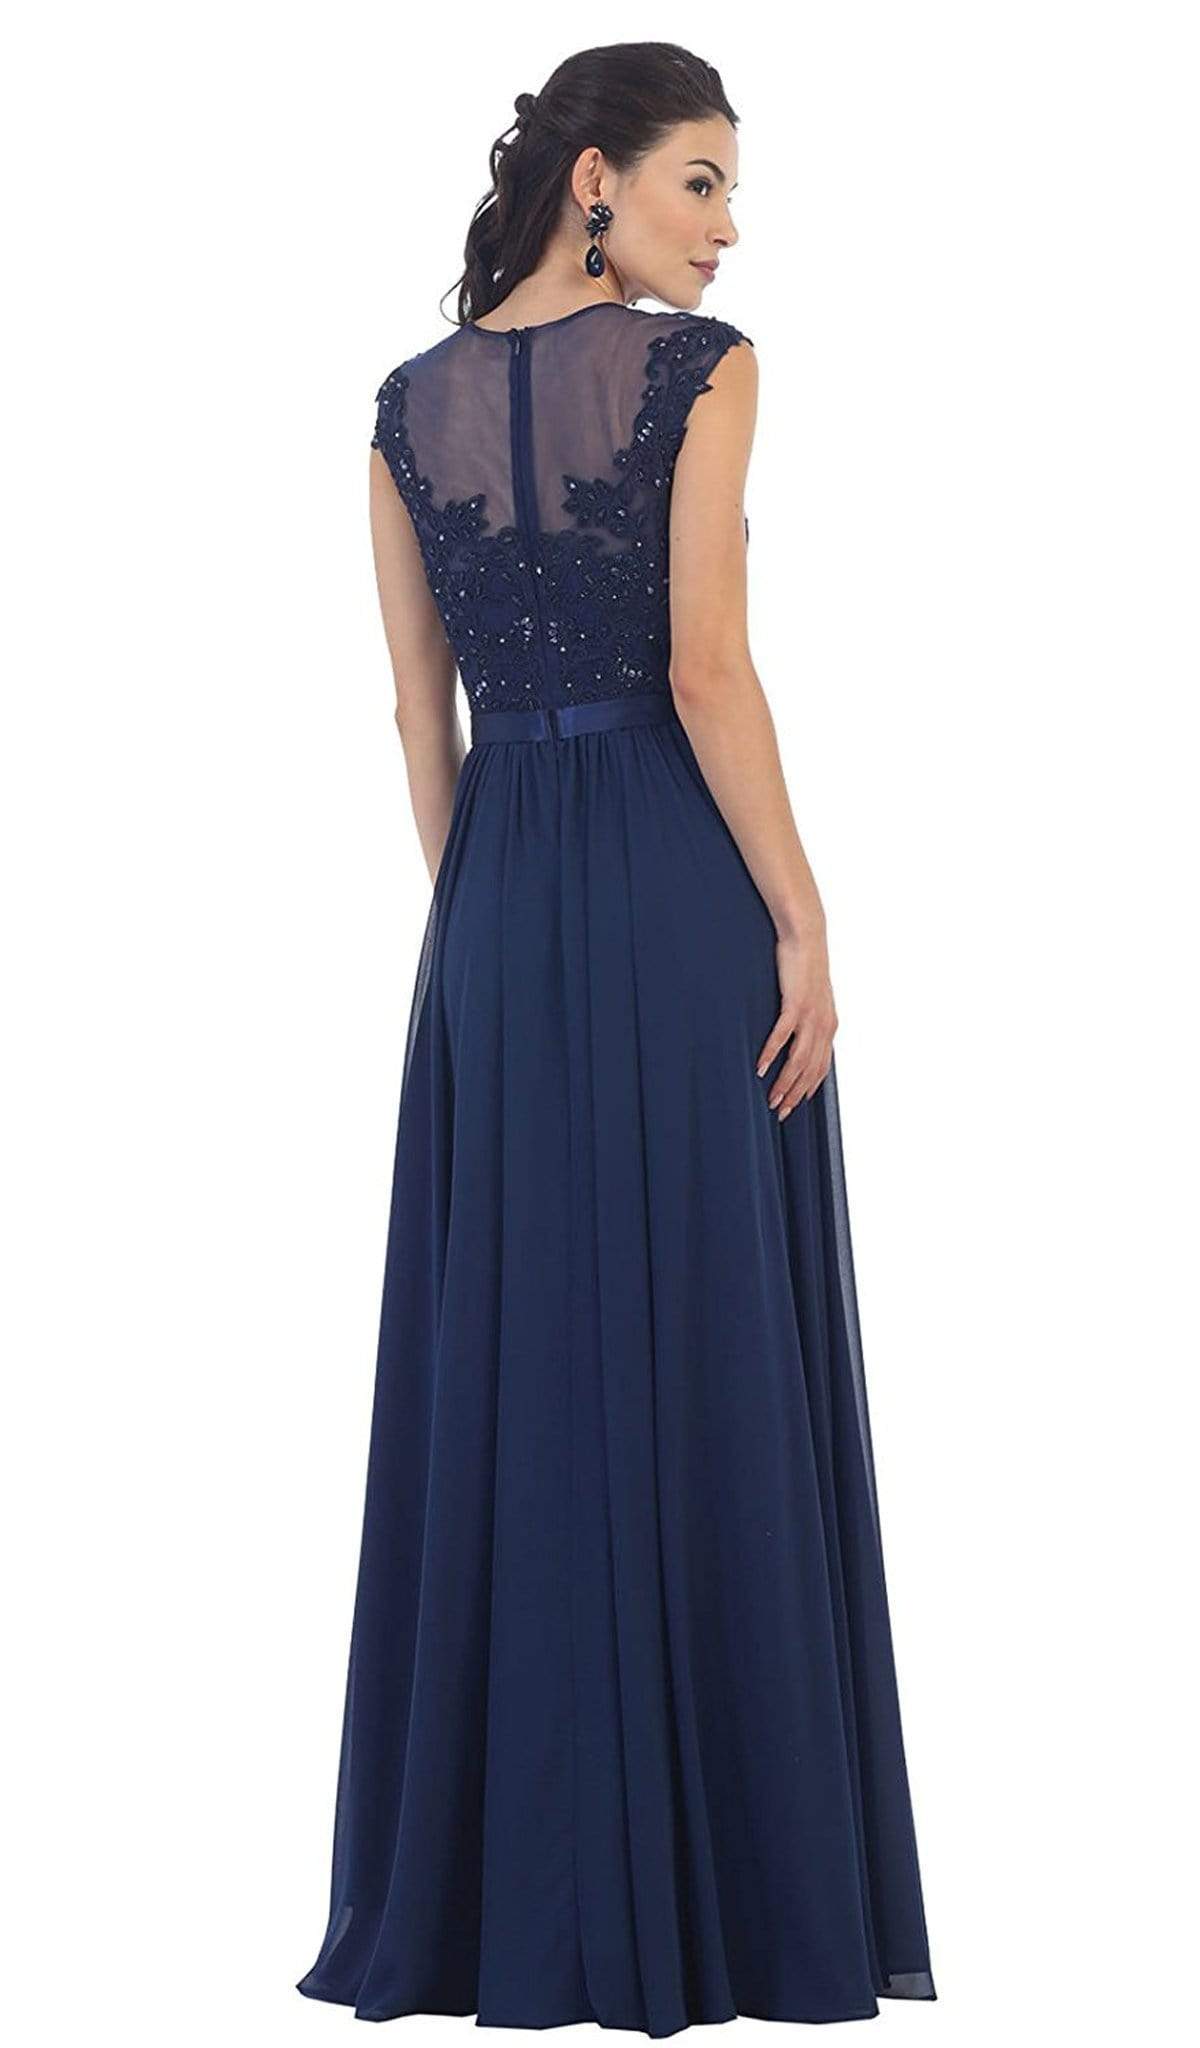 May Queen - Dainty Cap Sleeve Lace Applique Illusion Prom Gown ...